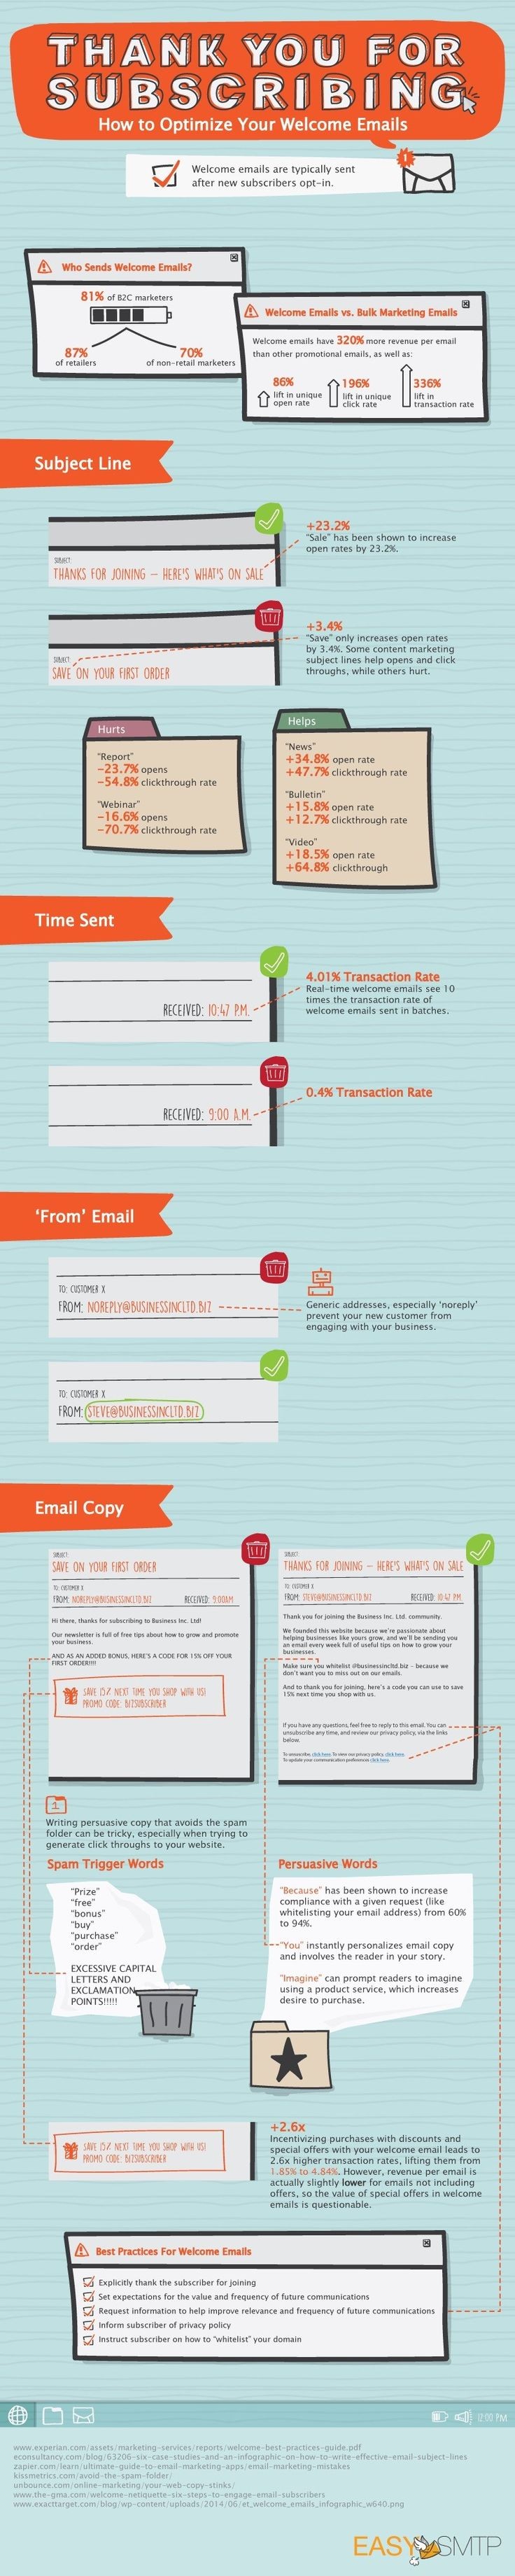 Email Marketing - Thank You for Subscribing: How t...